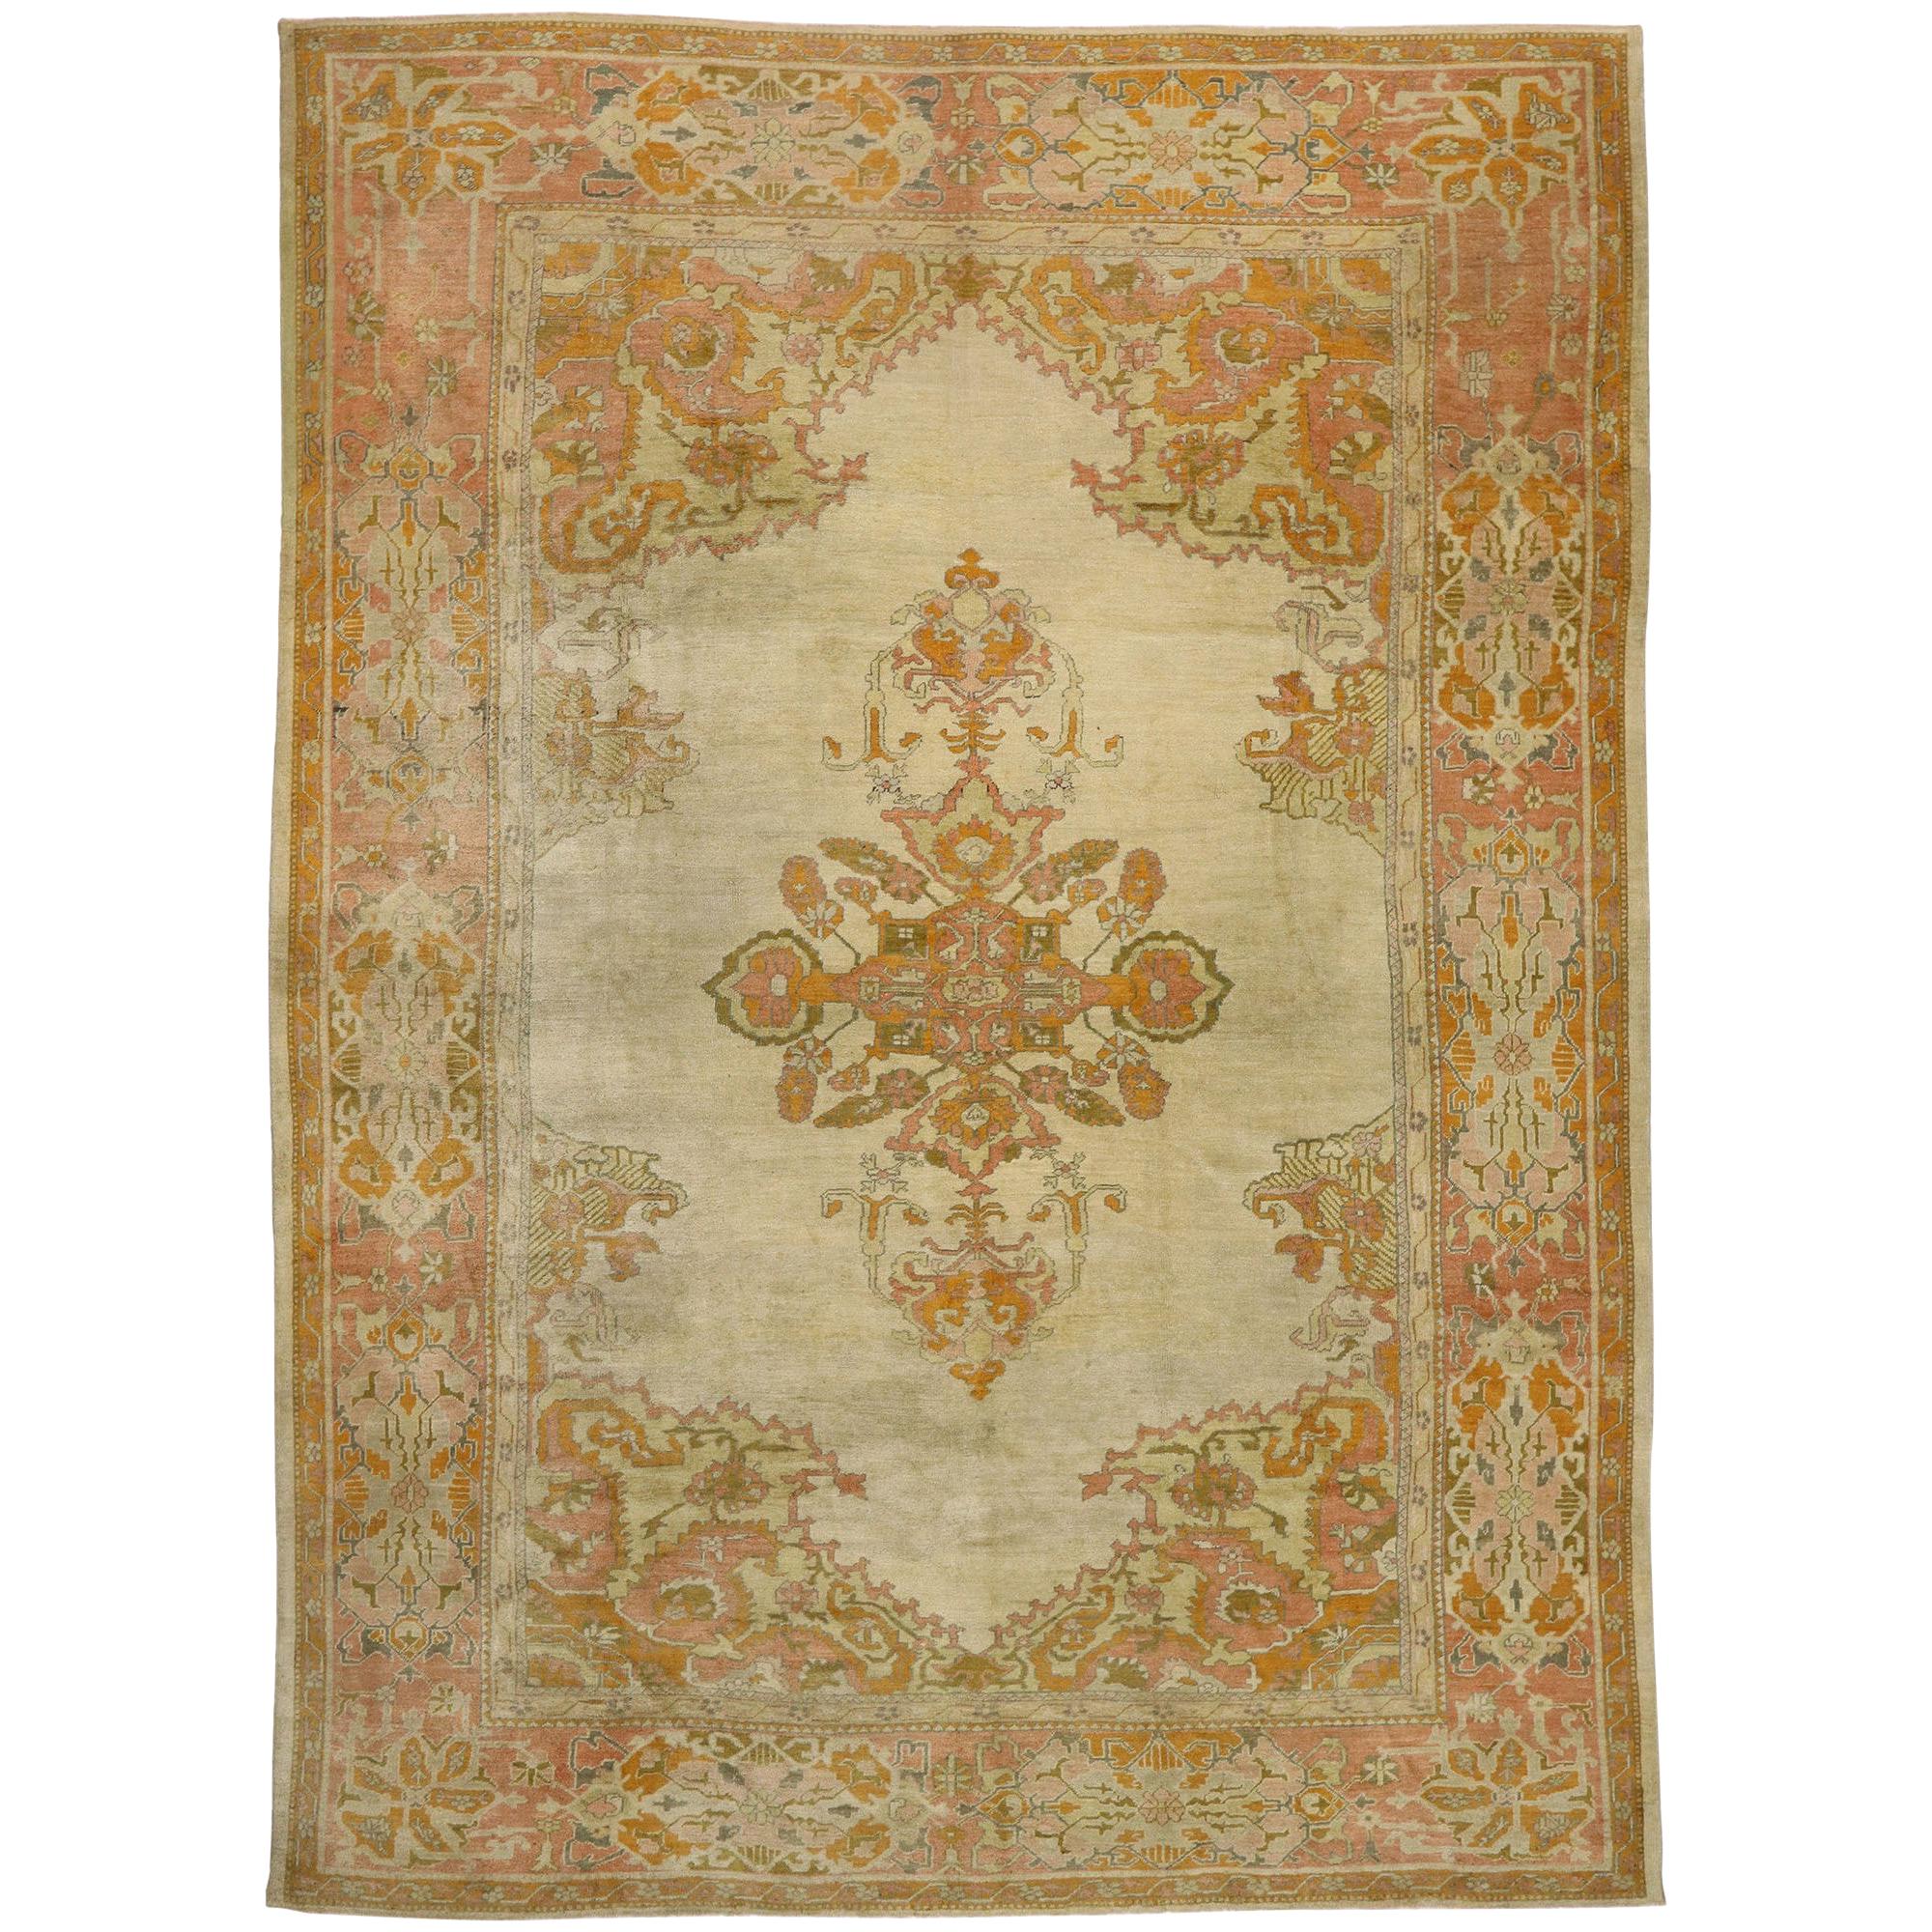 Distressed Antique Turkish Oushak Rug with Rustic Arts & Crafts Style For Sale